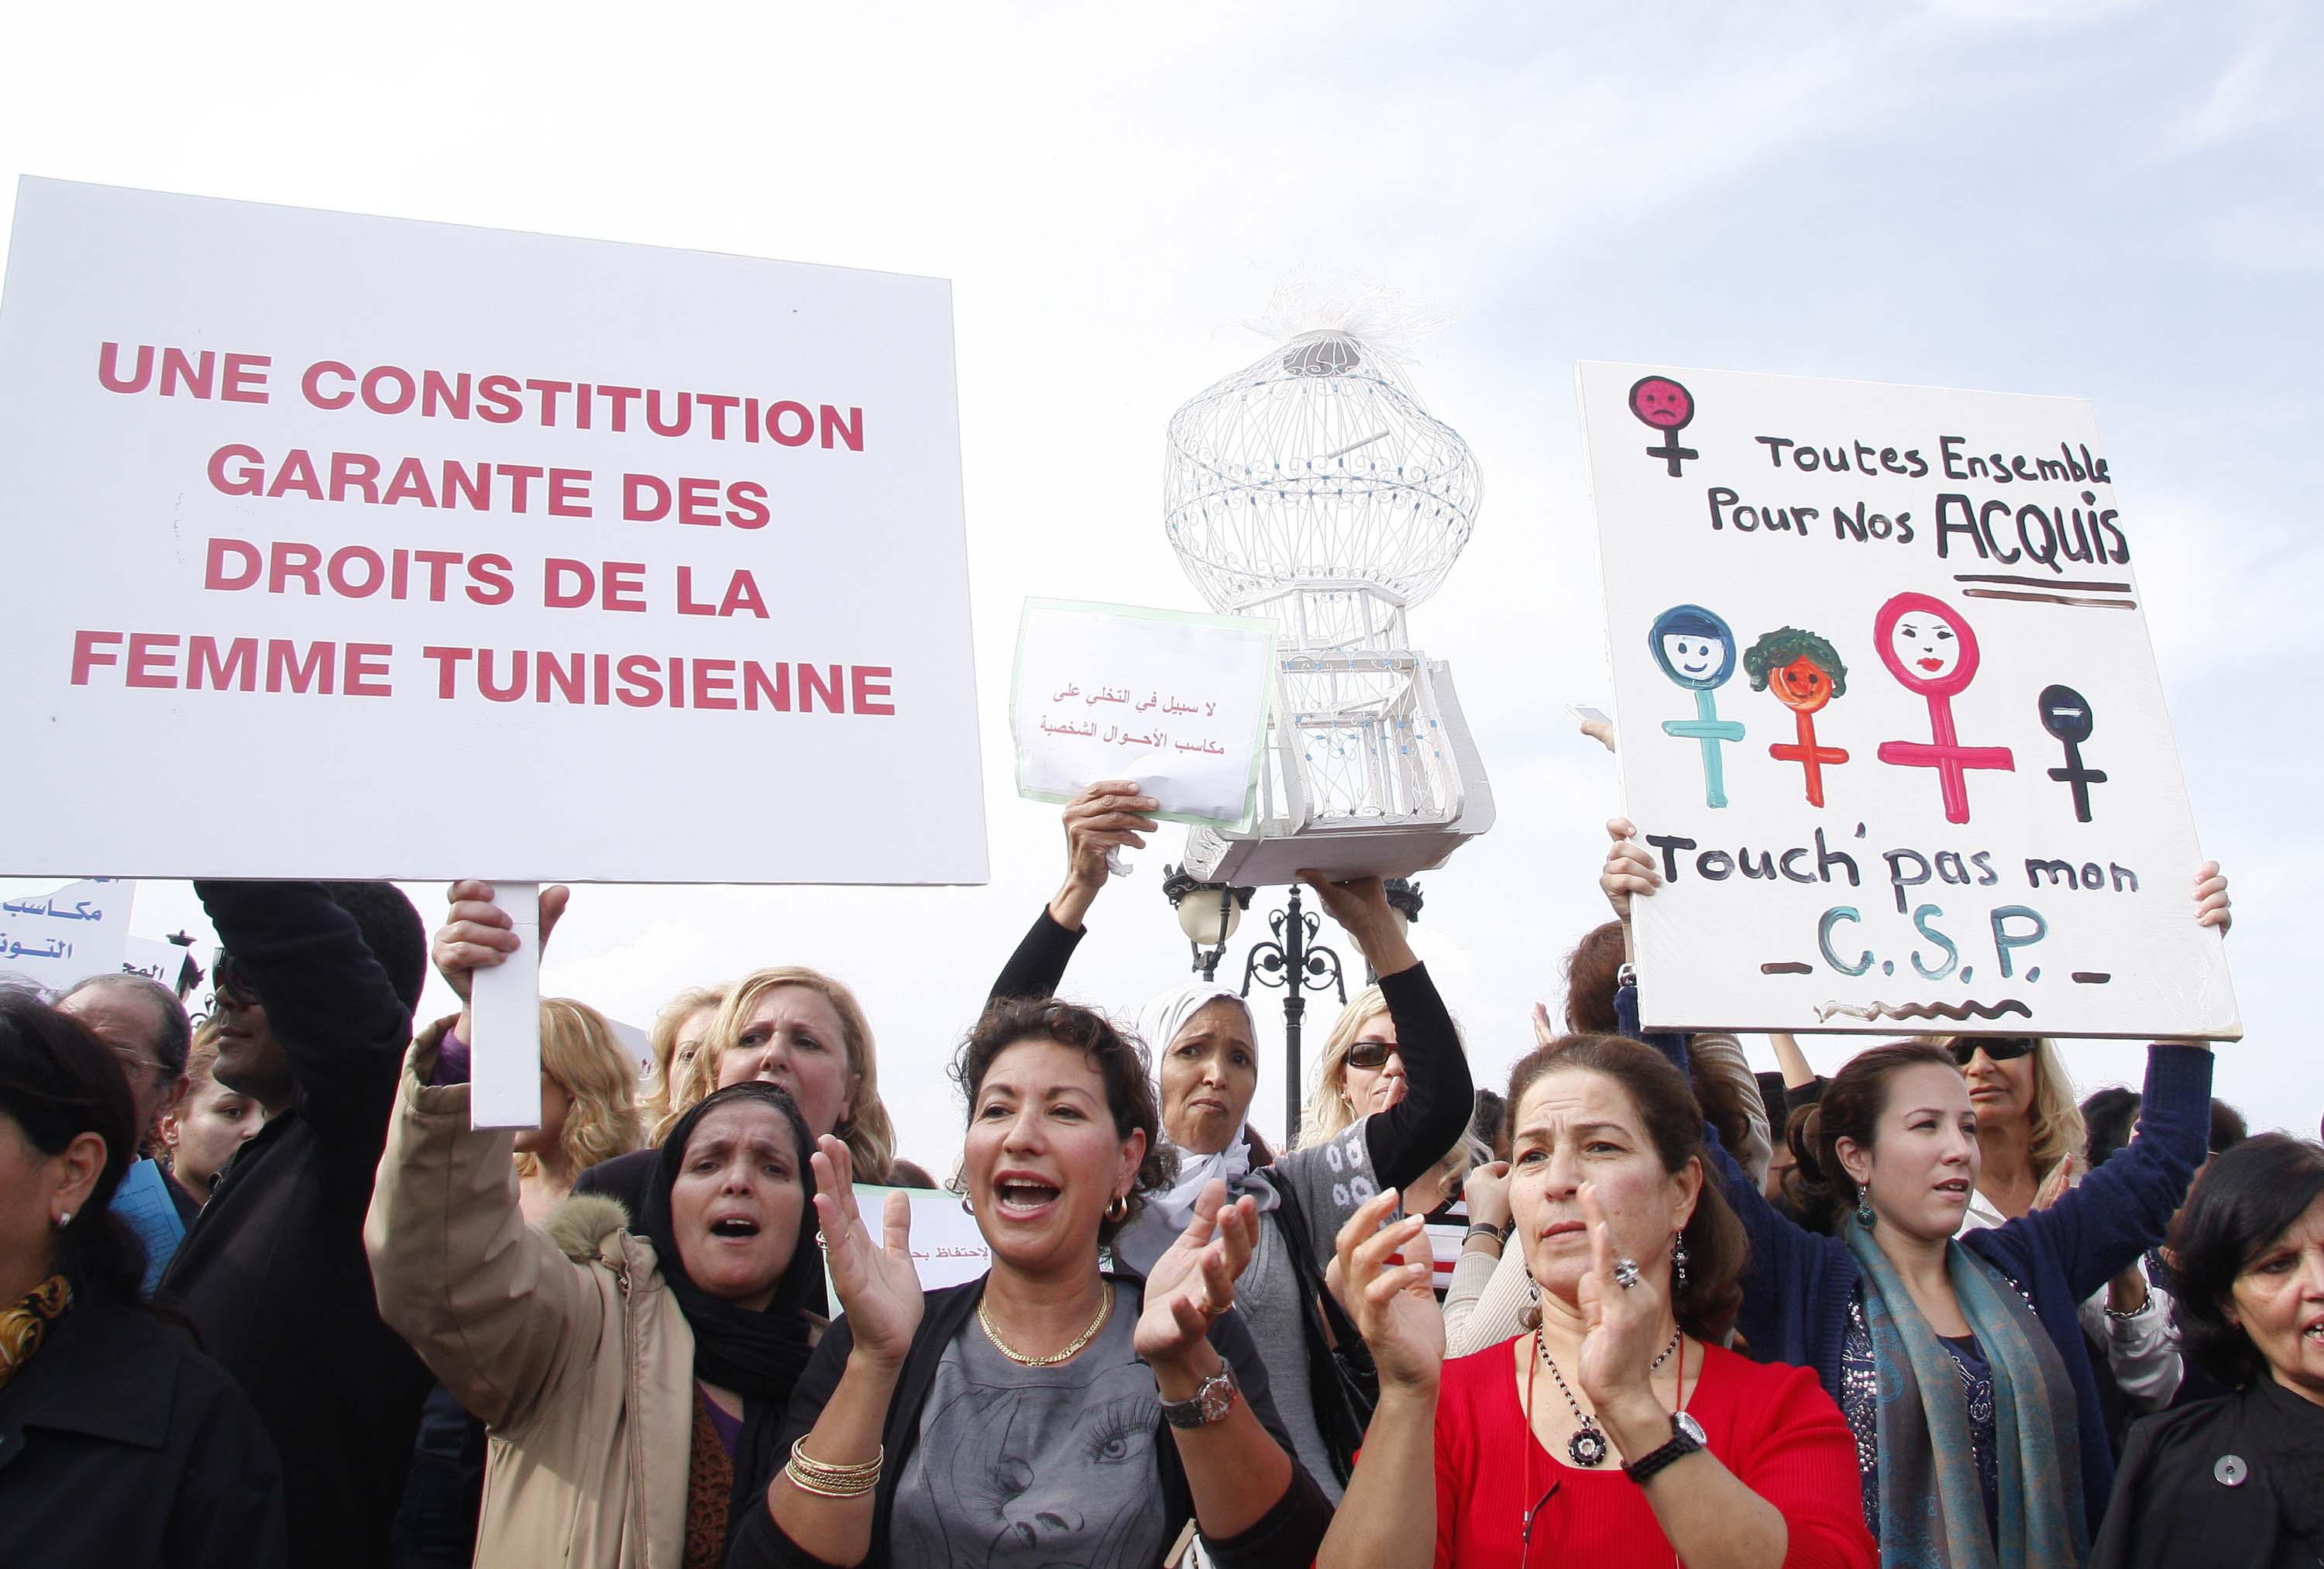 Tunisian women demonstrate for the protection of their rights in November 2011 ©SALAH HABIBI/AFP/Getty Images